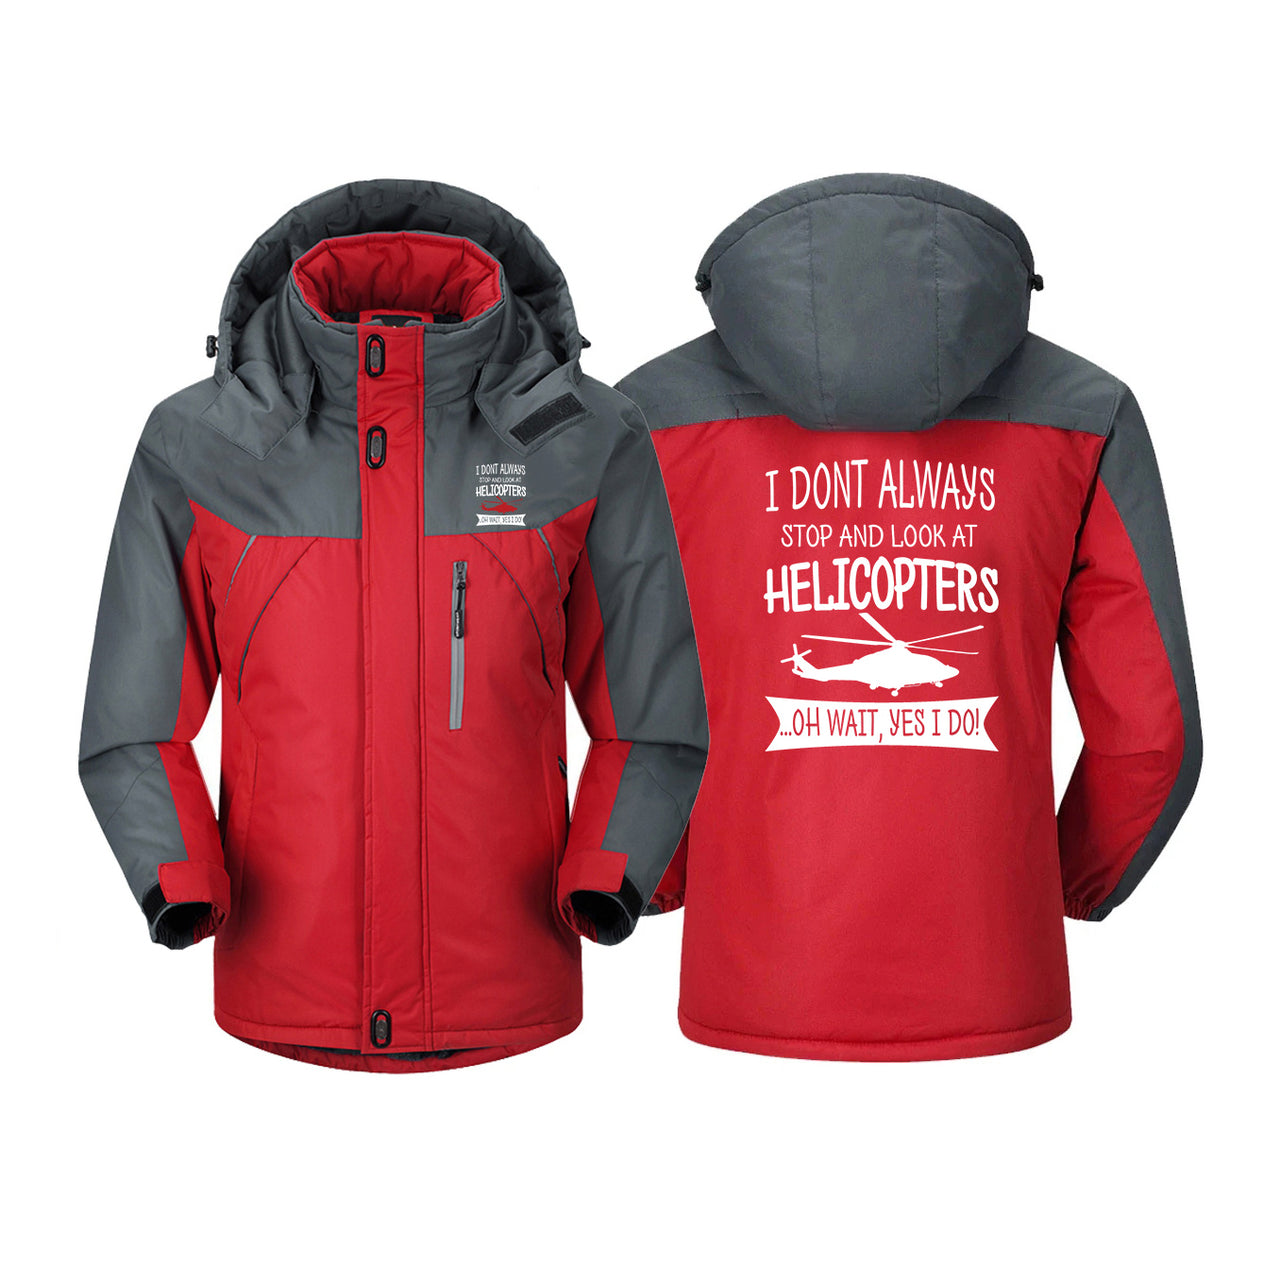 I Don't Always Stop and Look at Helicopters Designed Thick Winter Jackets